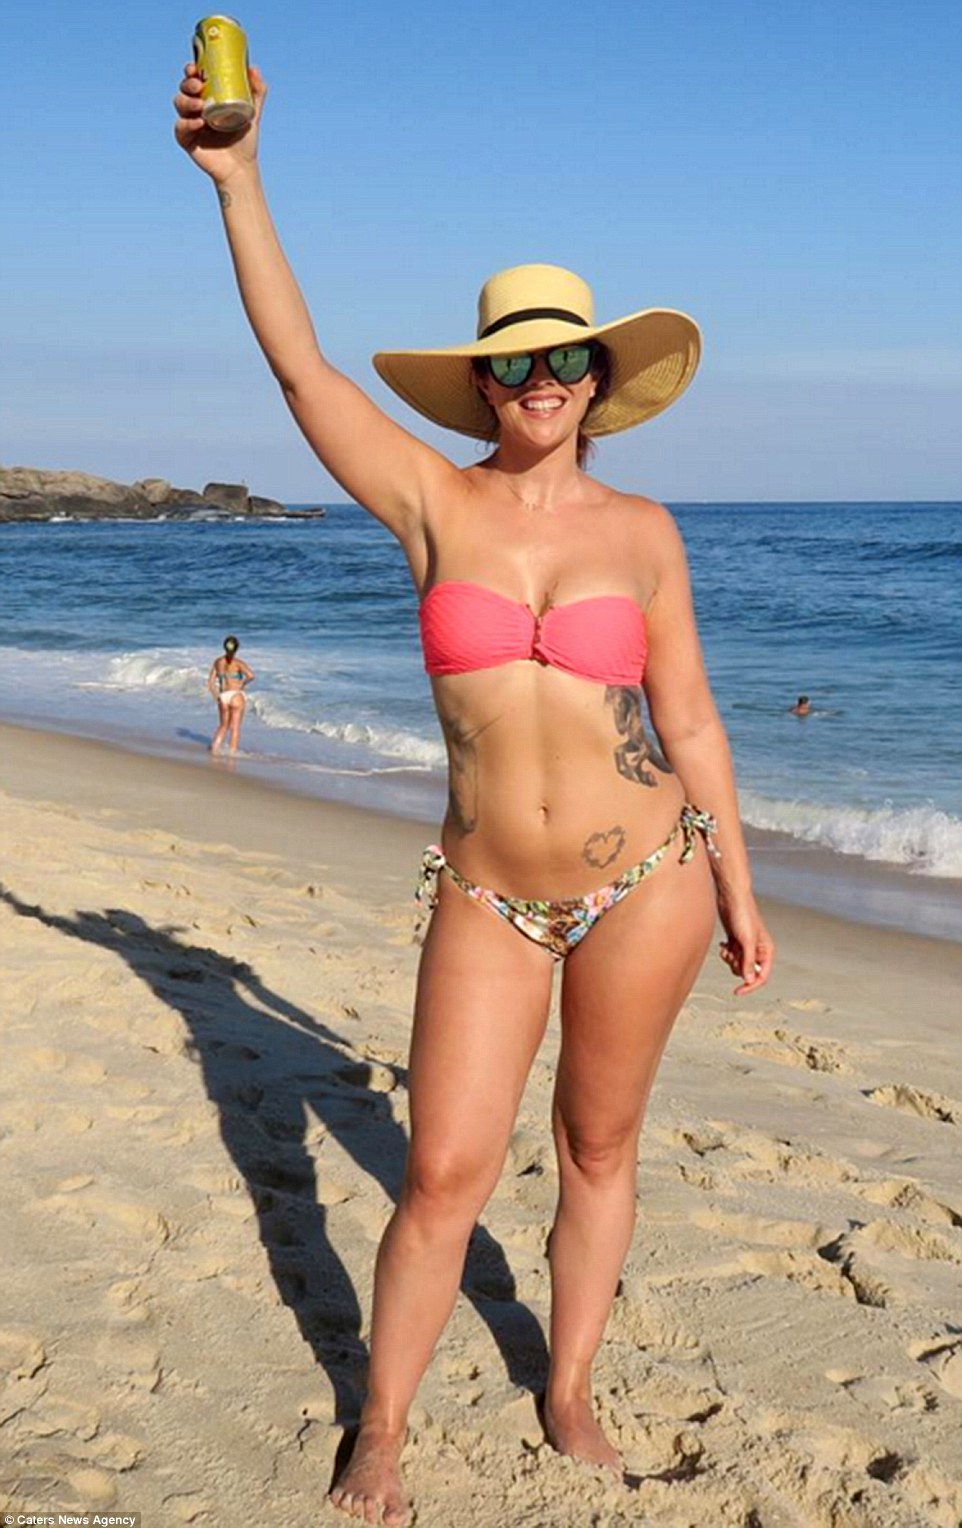 New life: Former BBC presenter, Claira Hermet, 28, from London, pictured in Prainha Brazil after her breasts were removed, embarked on a globe-trotting adventure after undergoing a double mastectomy and breast reconstruction surgery in January 2015